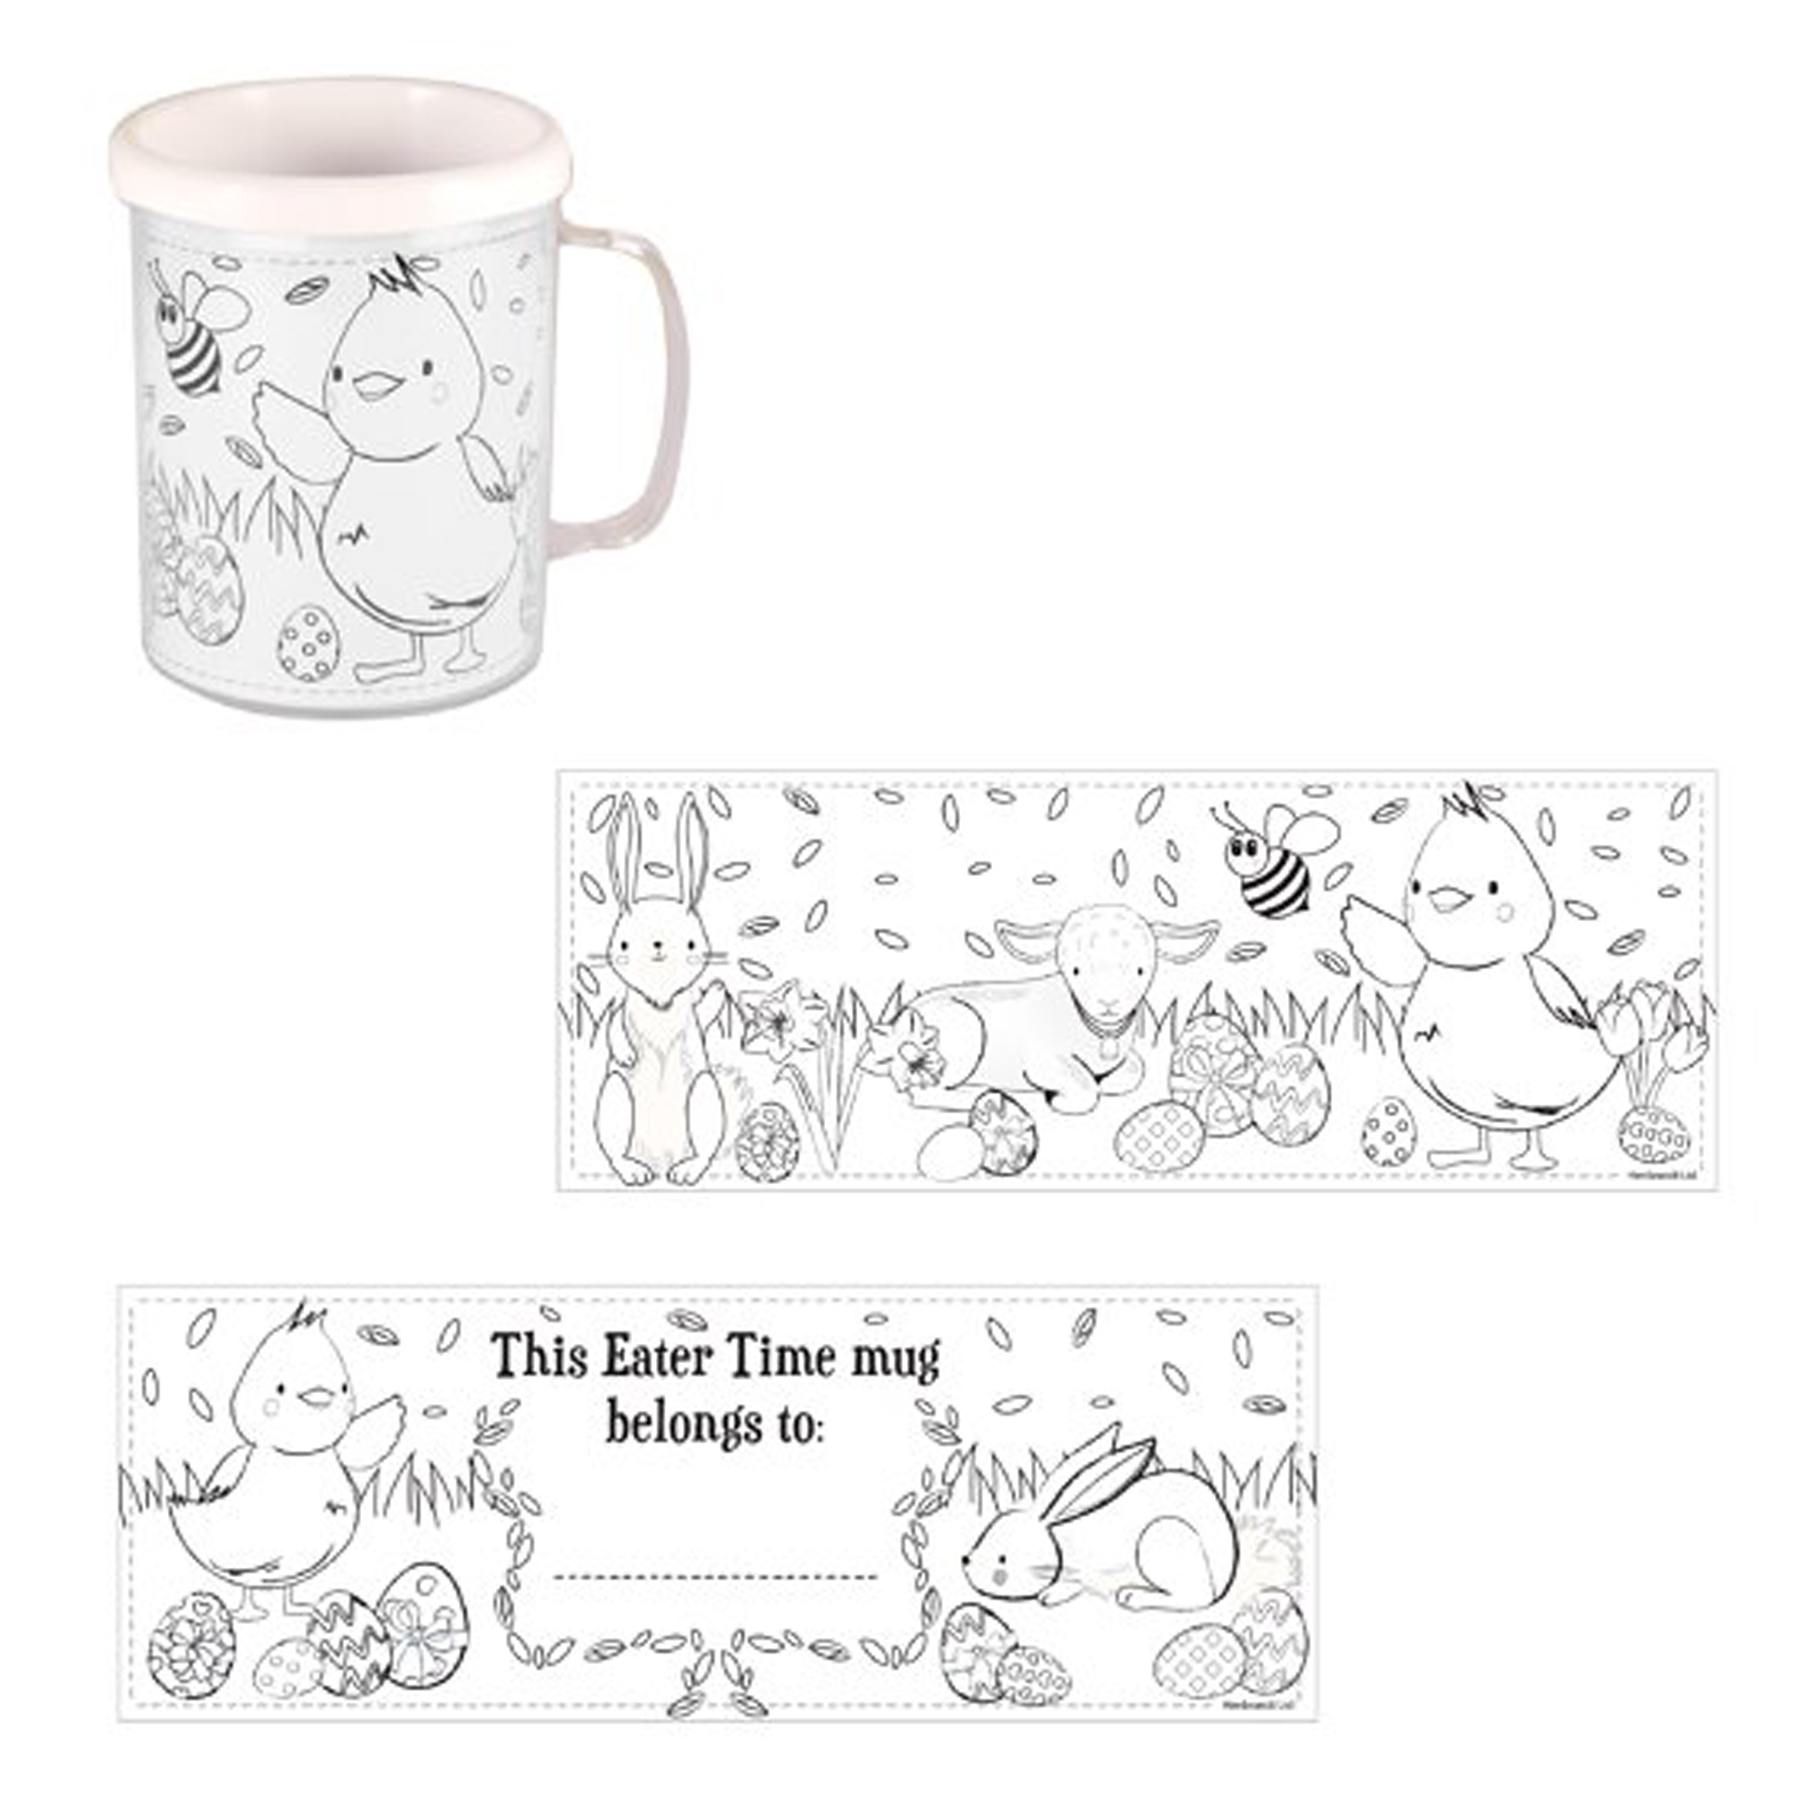 Easter Arts and Crafts Children Activities - Colouring Mug / Cup with 2 Pictures